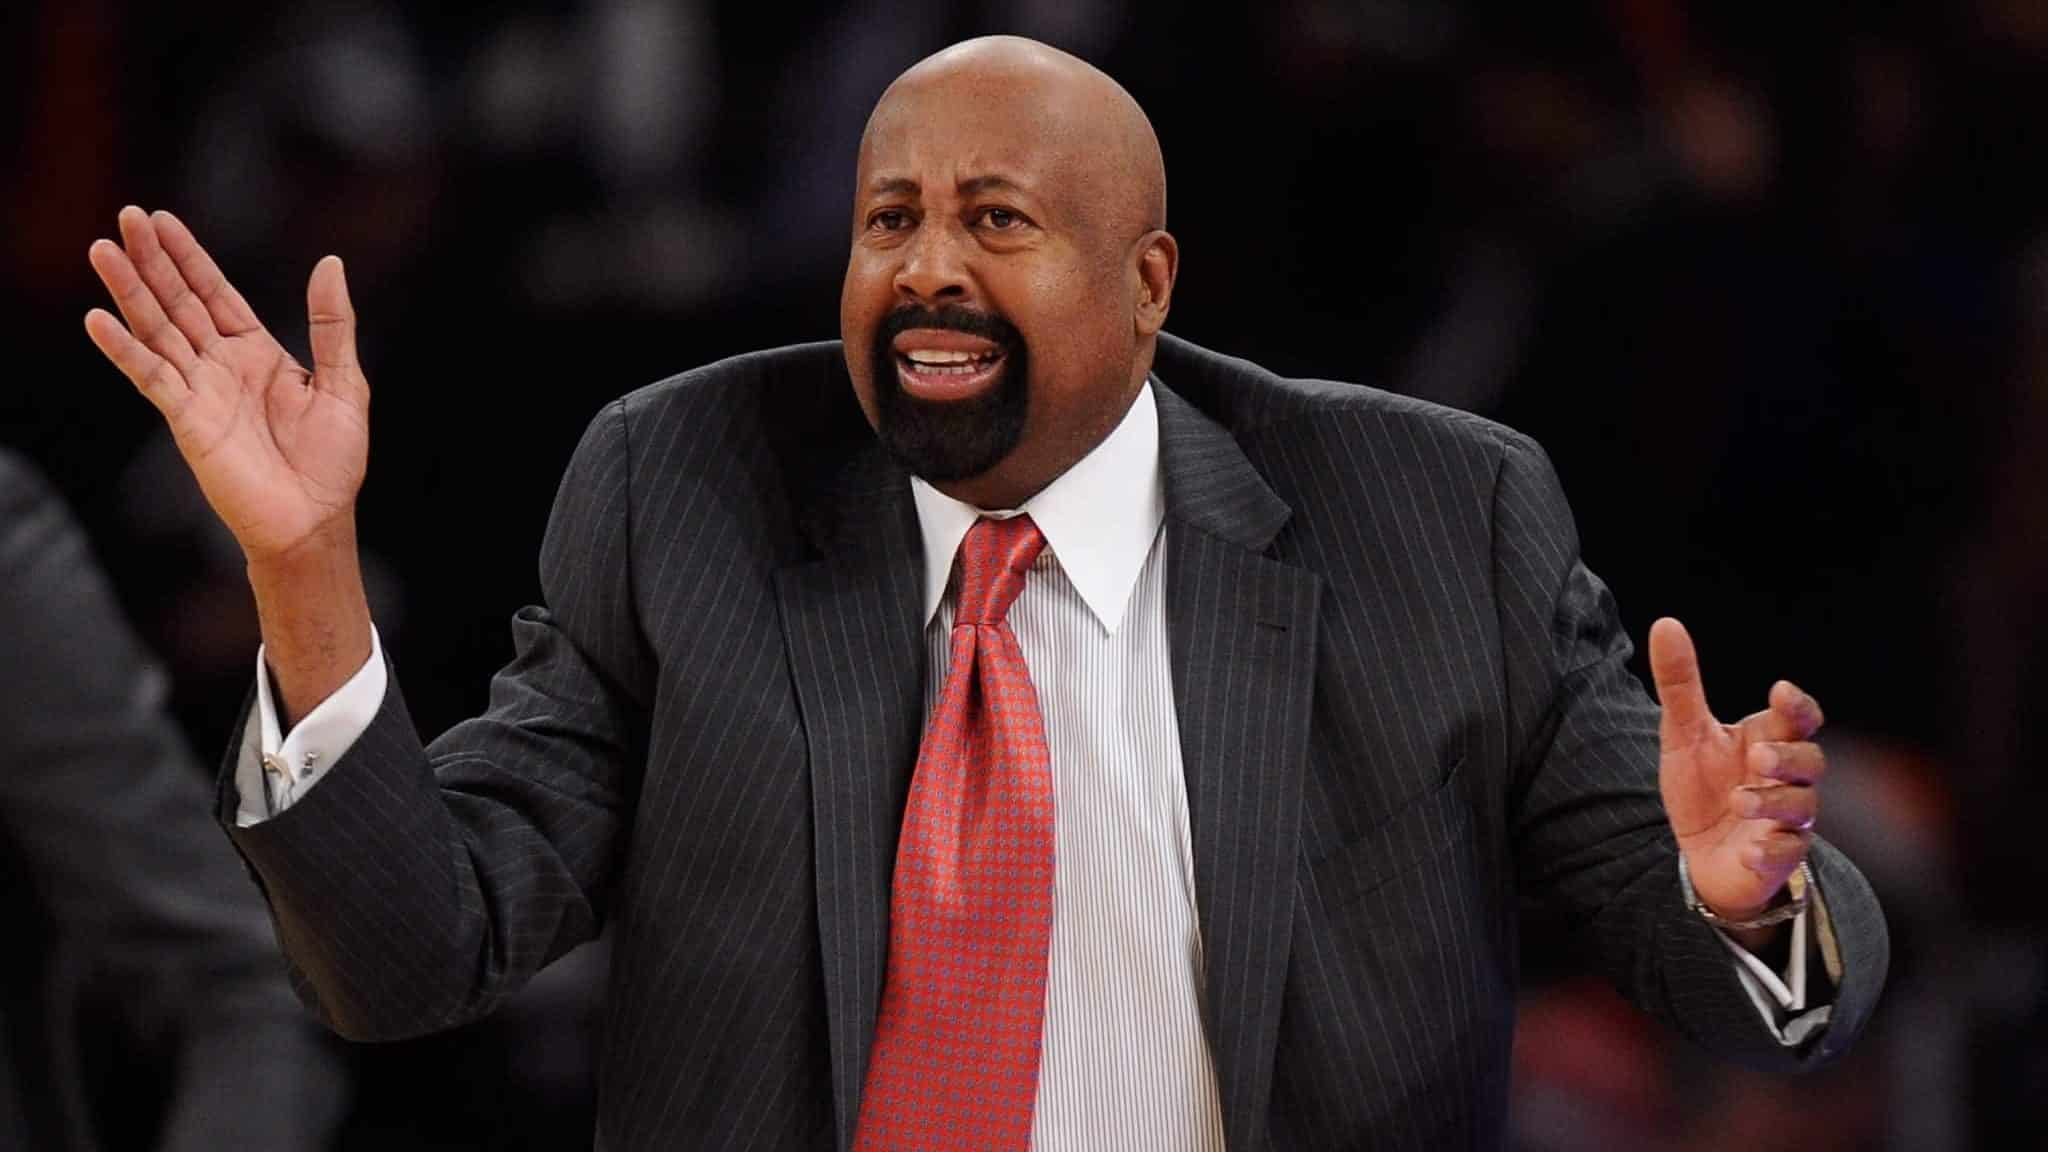 NEW YORK, NY - DECEMBER 16: New York Knicks head coach Mike Woodson directs his team during the second half against the Washington Wizards at Madison Square Garden on December 16, 2013 in New York City. NOTE TO USER: User expressly acknowledges and agrees that, by downloading and/or using this photograph, user is consenting to the terms and conditions of the Getty Images License Agreement. The Wizards defeat the Knicks 102-101.